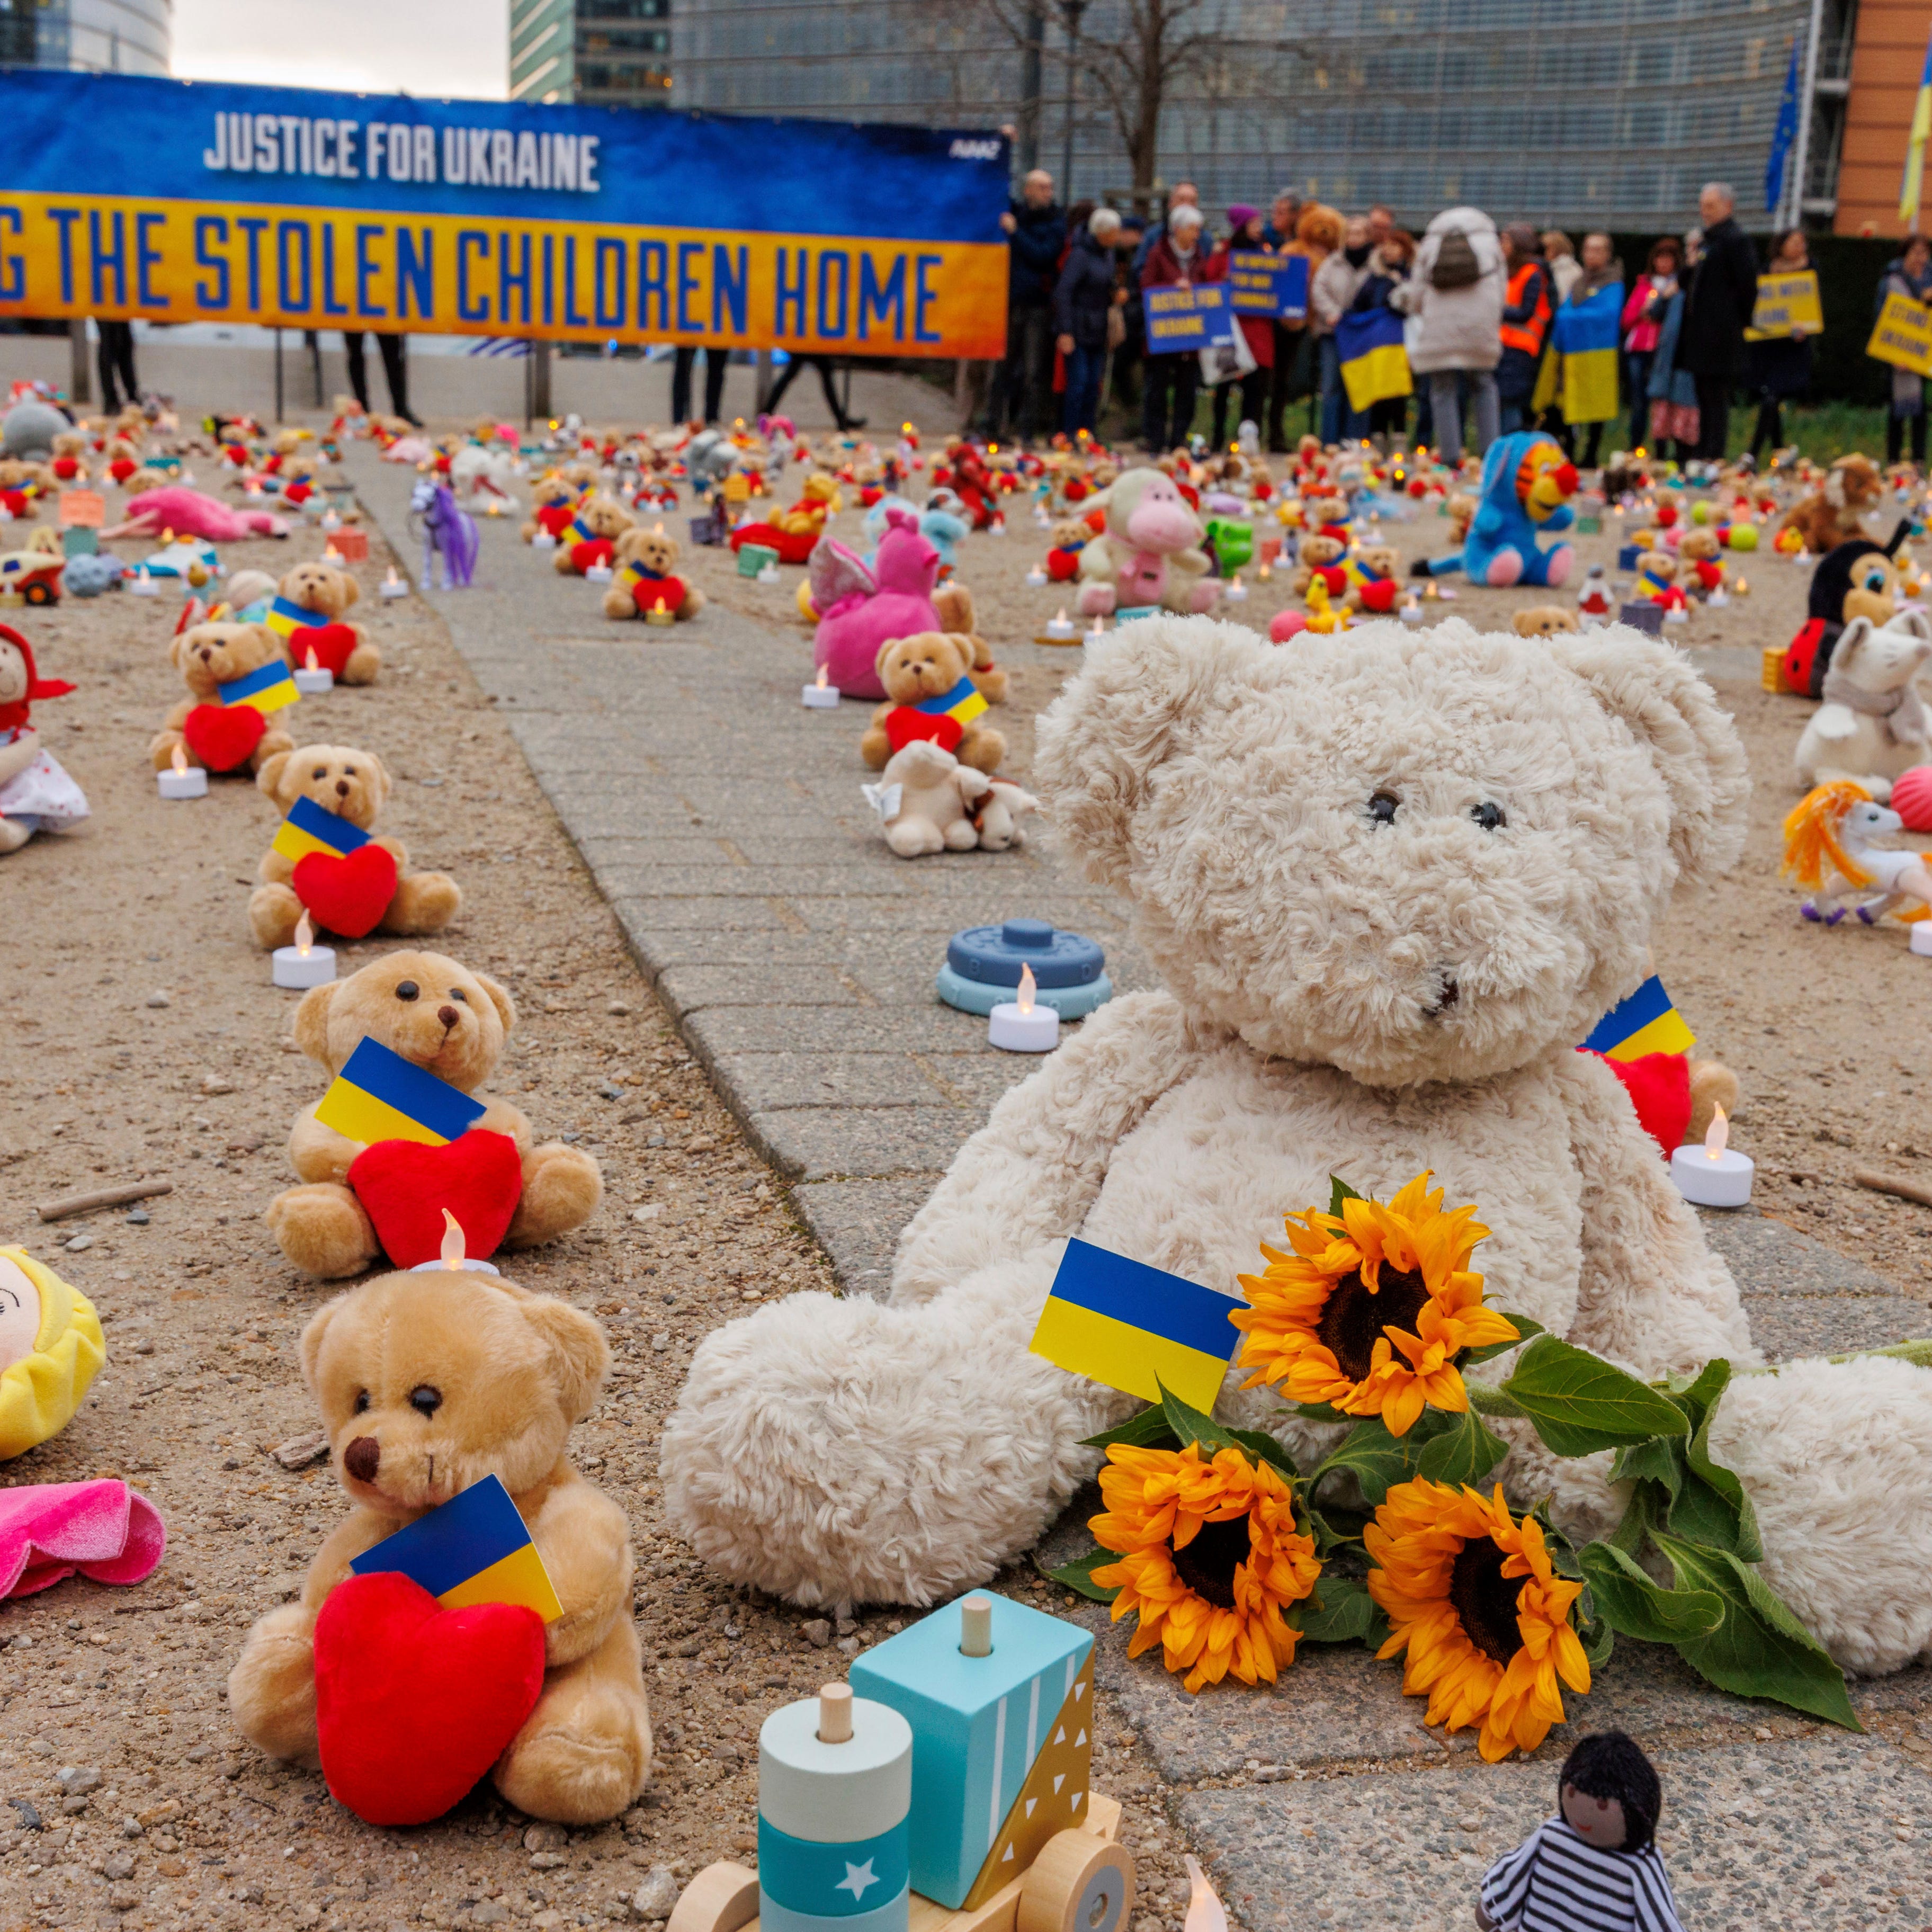 IMAGE DISTRIBUTED FOR AVAAZ.ORG - Avaaz members and Ukrainian refugees install thousands of kids' teddy bears and toys at Schuman Roundabout in front of the European Commission to highlight the reported abduction of thousands of Ukrainian children by Russia on Thursday, Feb 23, 2022 in Brussels. Attendants call on EU, US, UK and Canadian leaders to sanction 14 Russian officials who are among those allegedly responsible for the abductions. (Olivier Matthys/AP Images for   Avaaz.org) ORG XMIT: OM112